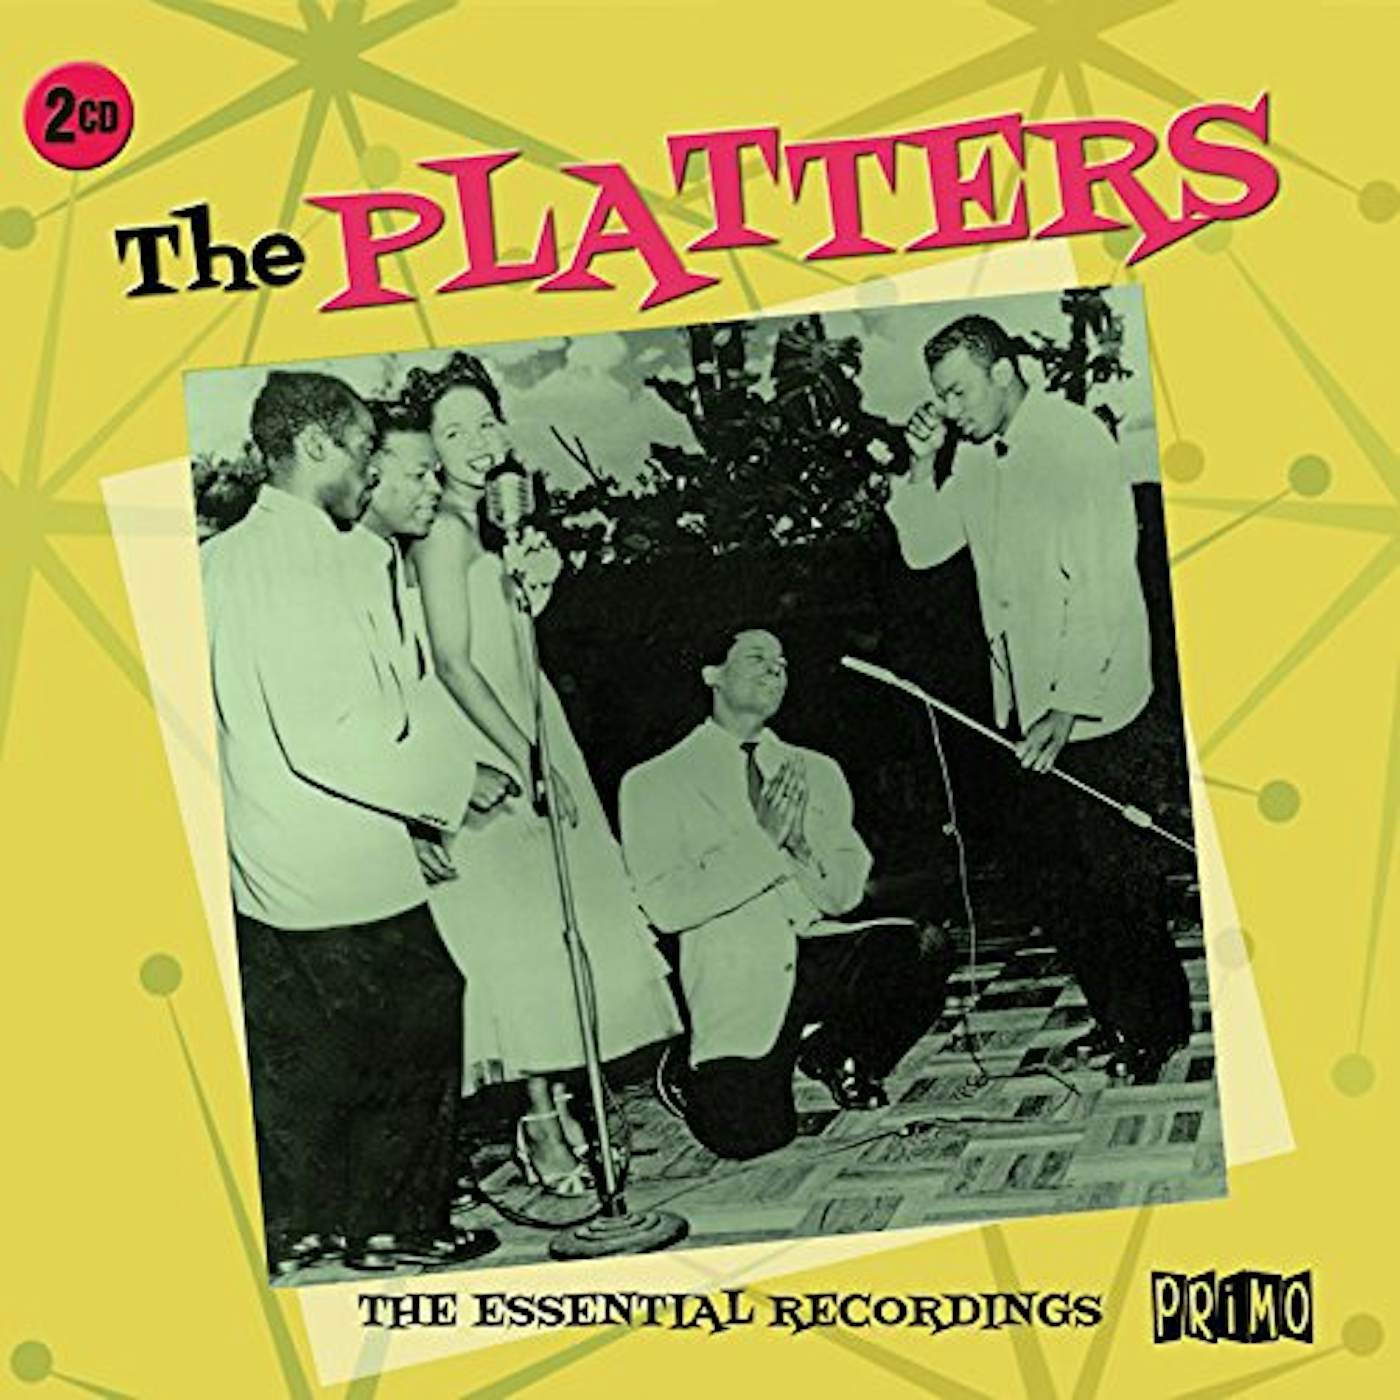 The Platters ESSENTIAL RECORDINGS CD